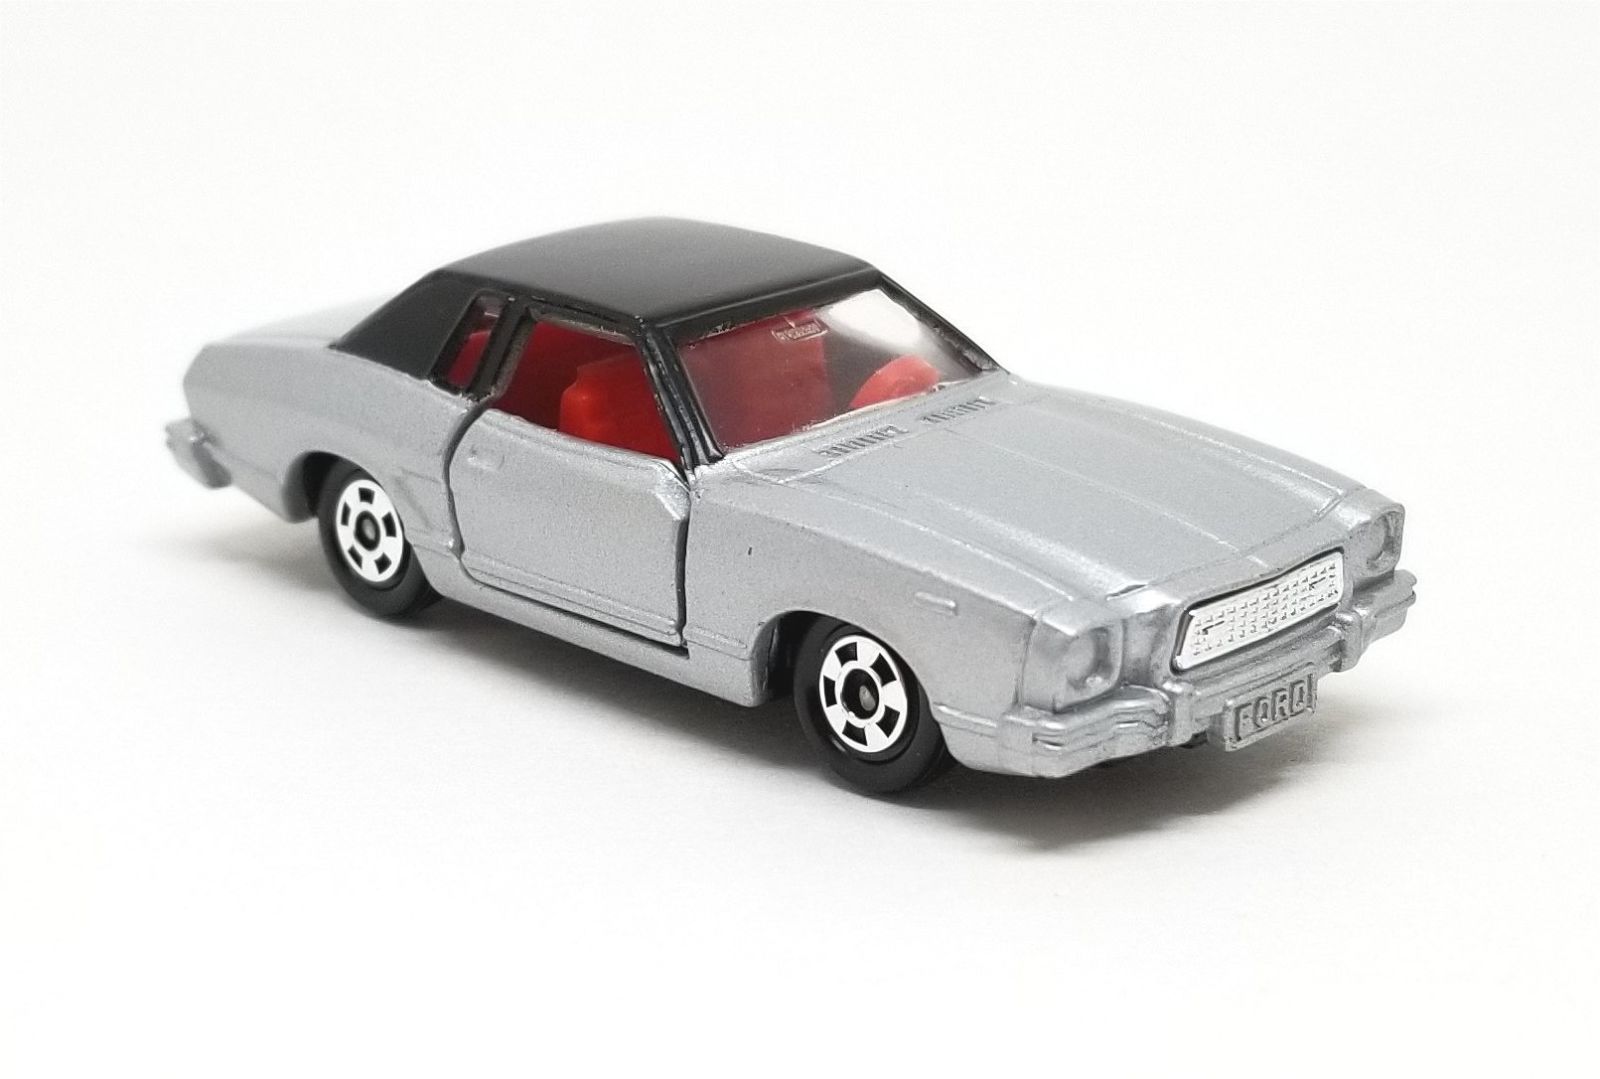 Illustration for article titled [REVIEW] Tomica Ford Mustang II Ghia